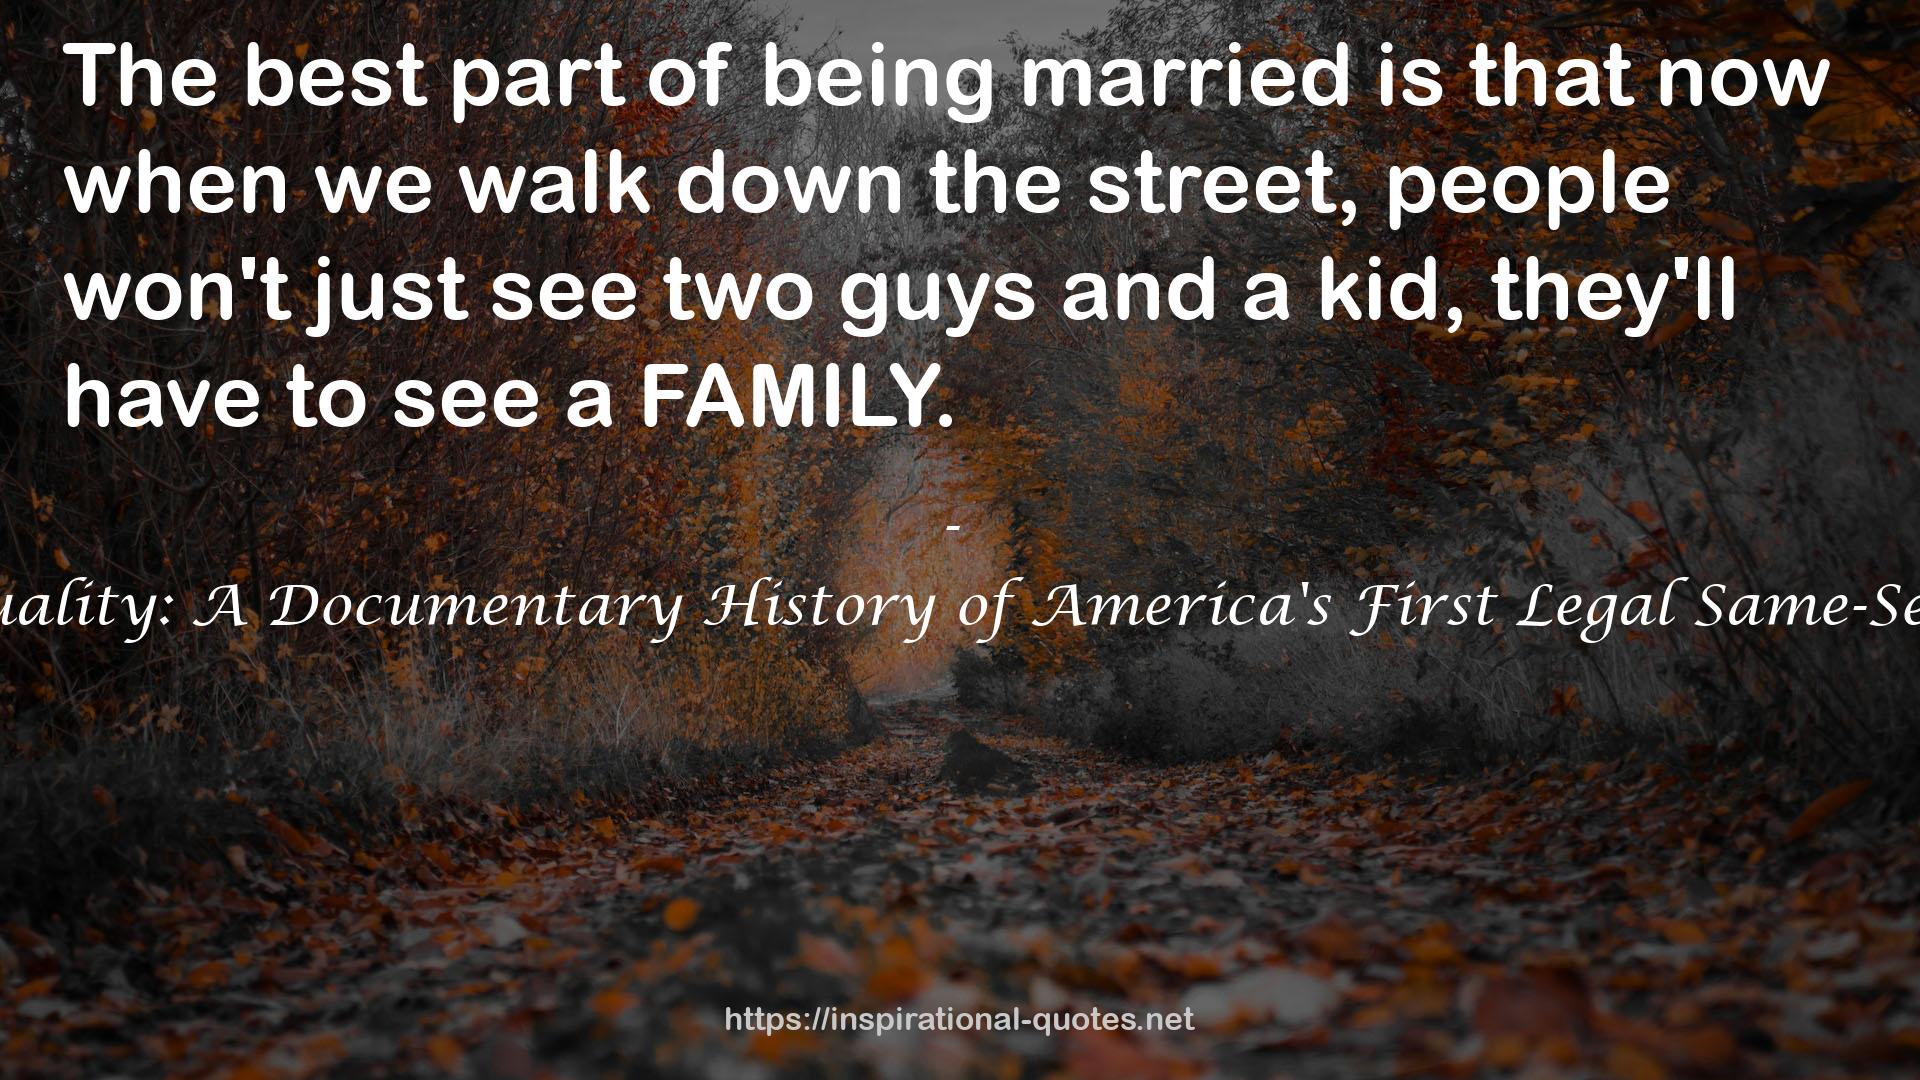 Courting Equality: A Documentary History of America's First Legal Same-Sex Marriages QUOTES